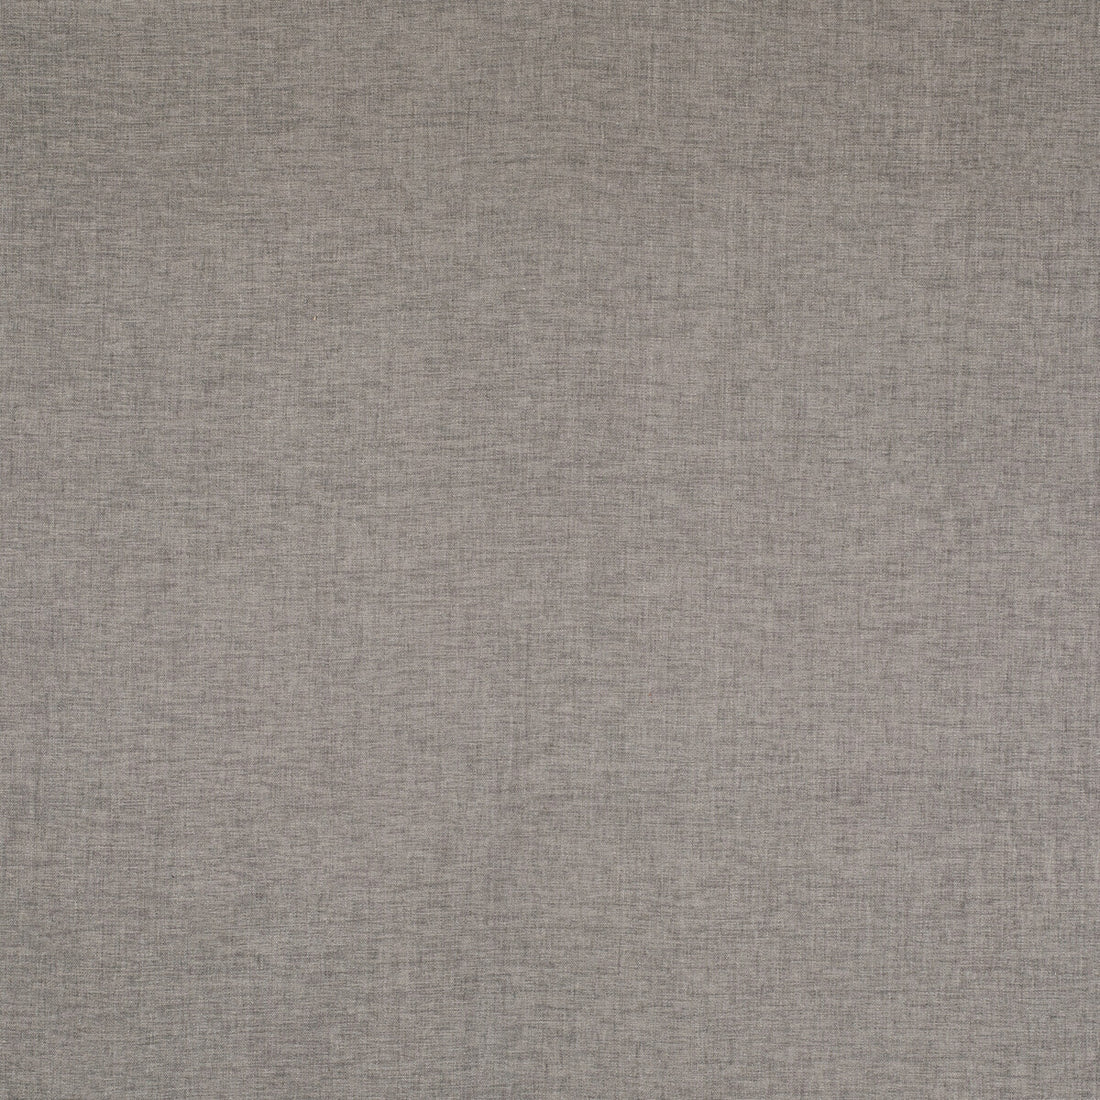 Kravet Smart fabric in 36095-611 color - pattern 36095.611.0 - by Kravet Smart in the Eco-Friendly Chenille collection